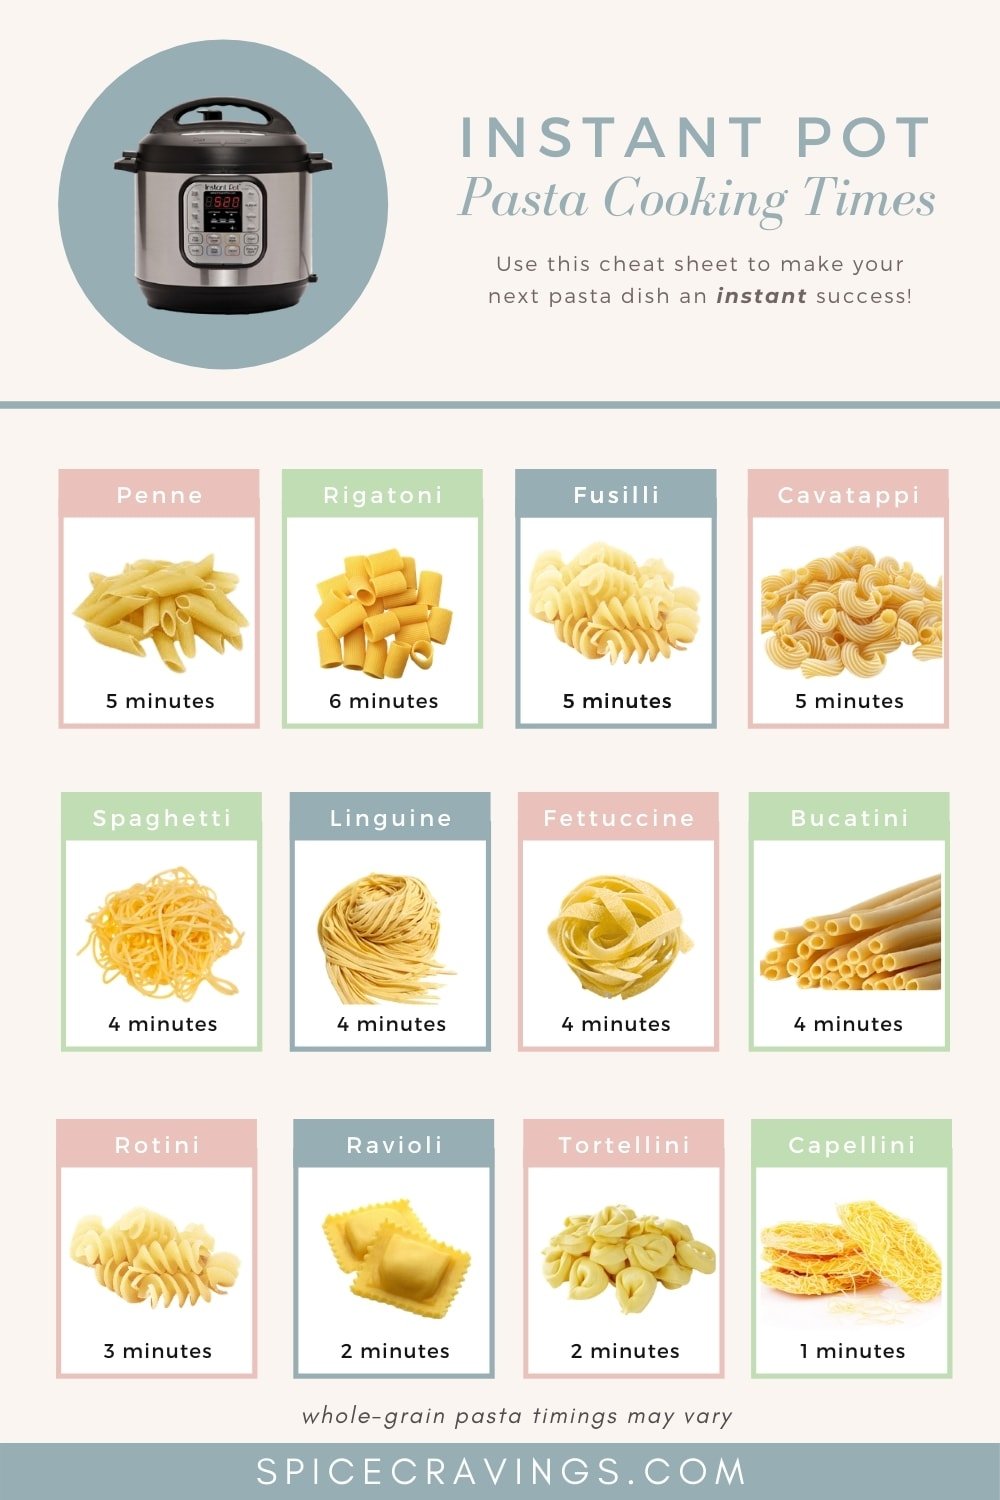 A chart showing cooking times for different shapes of pasta